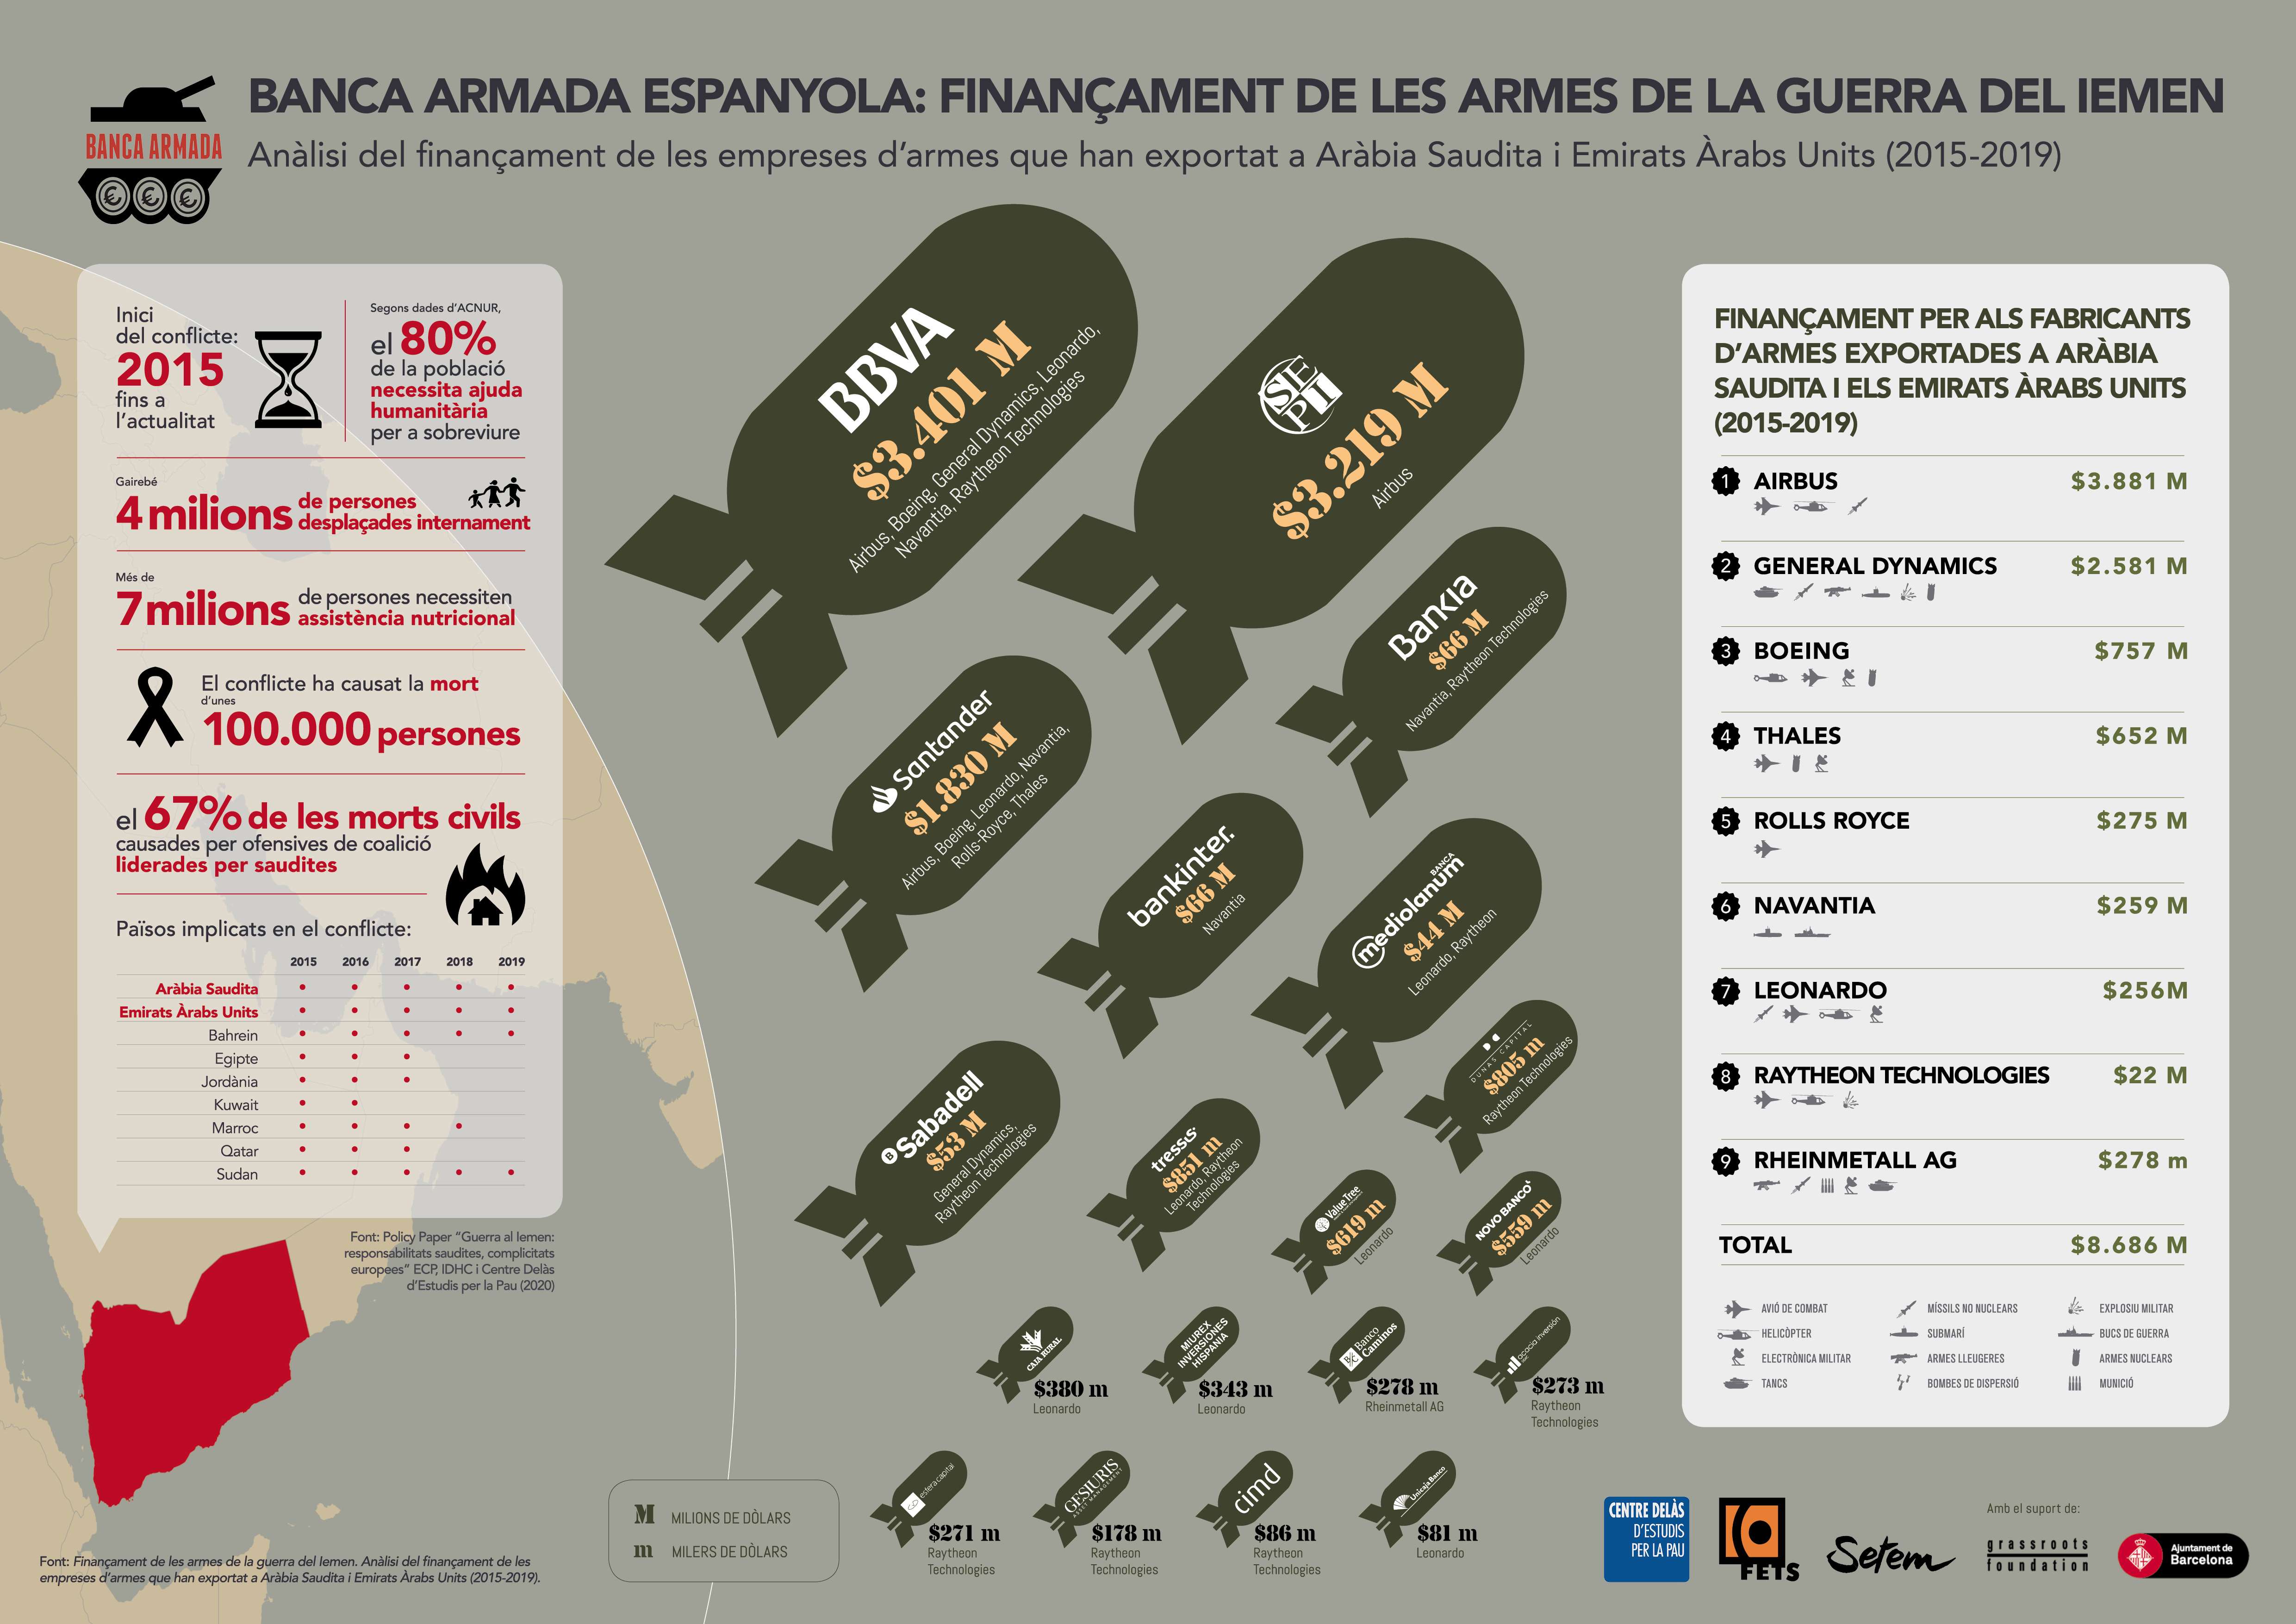 Infographics “Spanish Armed Banking: Financing the weapons of the Yemen war”